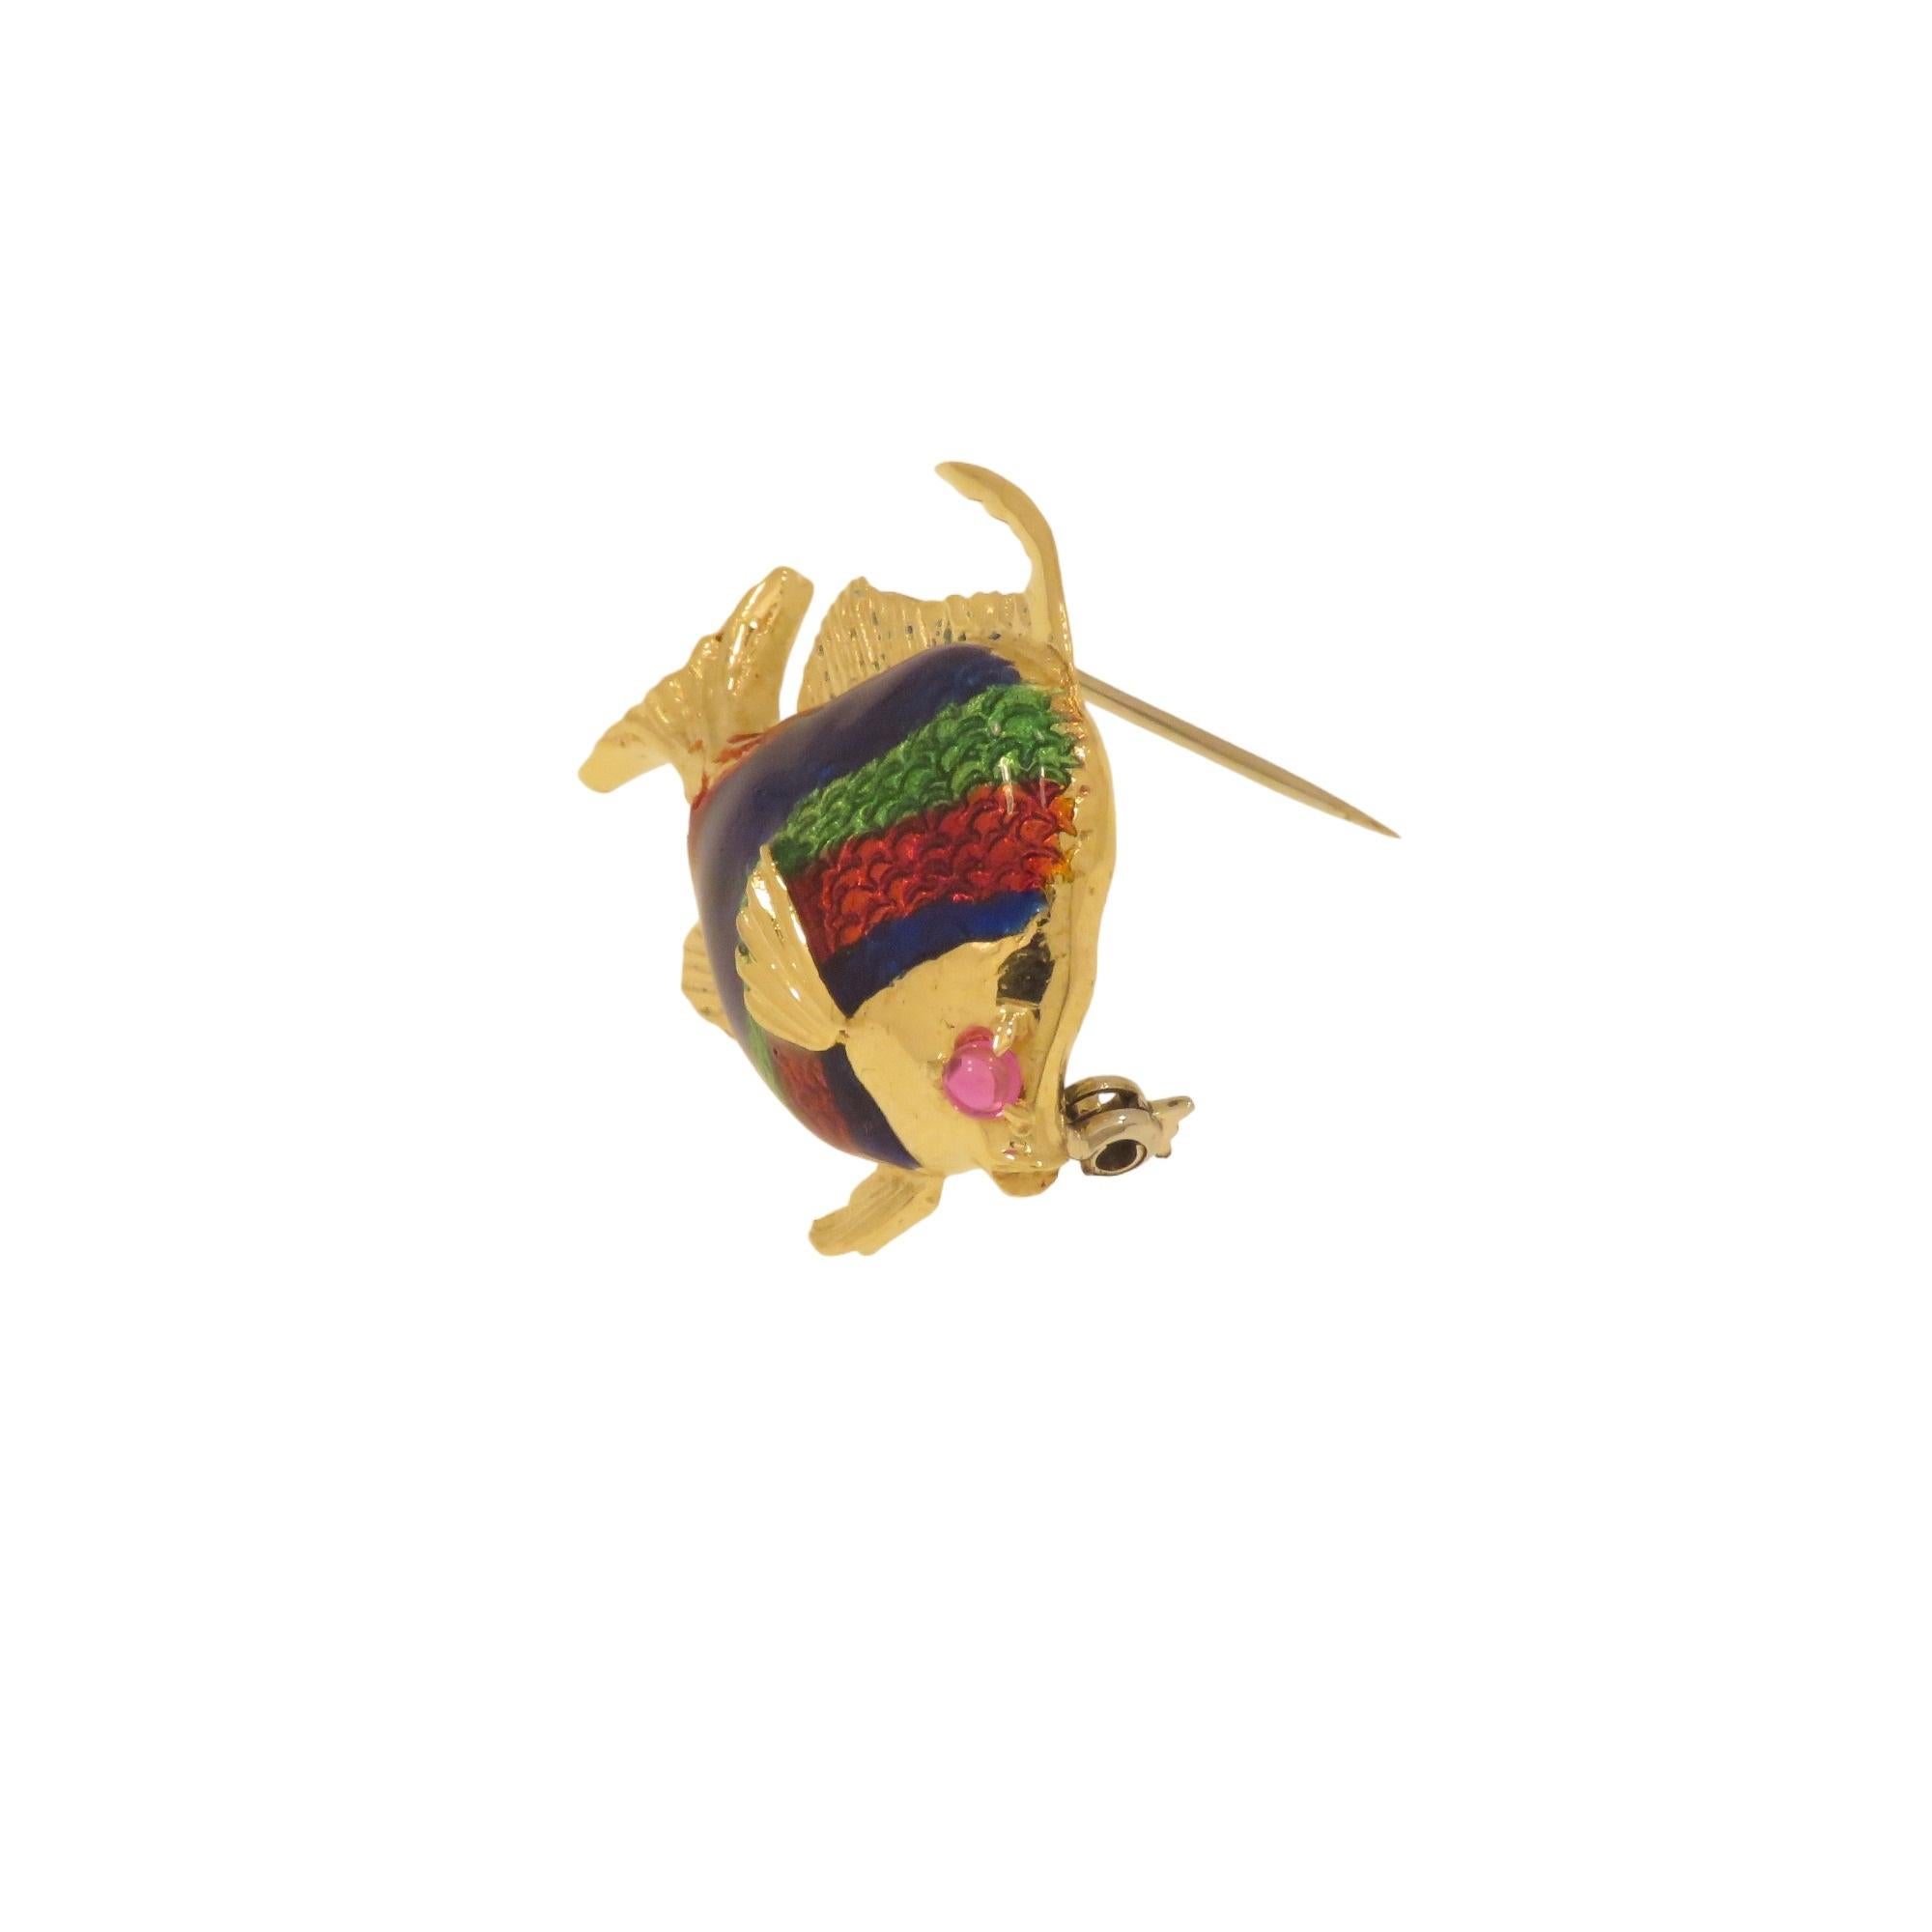 1960' vintage brooch featuring a fish decorated with enamel in shades of blue, green and red, handcrafted in 18 carat yellow gold with a little tourmaline for the fish eye. The size of the brooch is 28X20 mm / 1.102x0.787 inches. The enamel is in